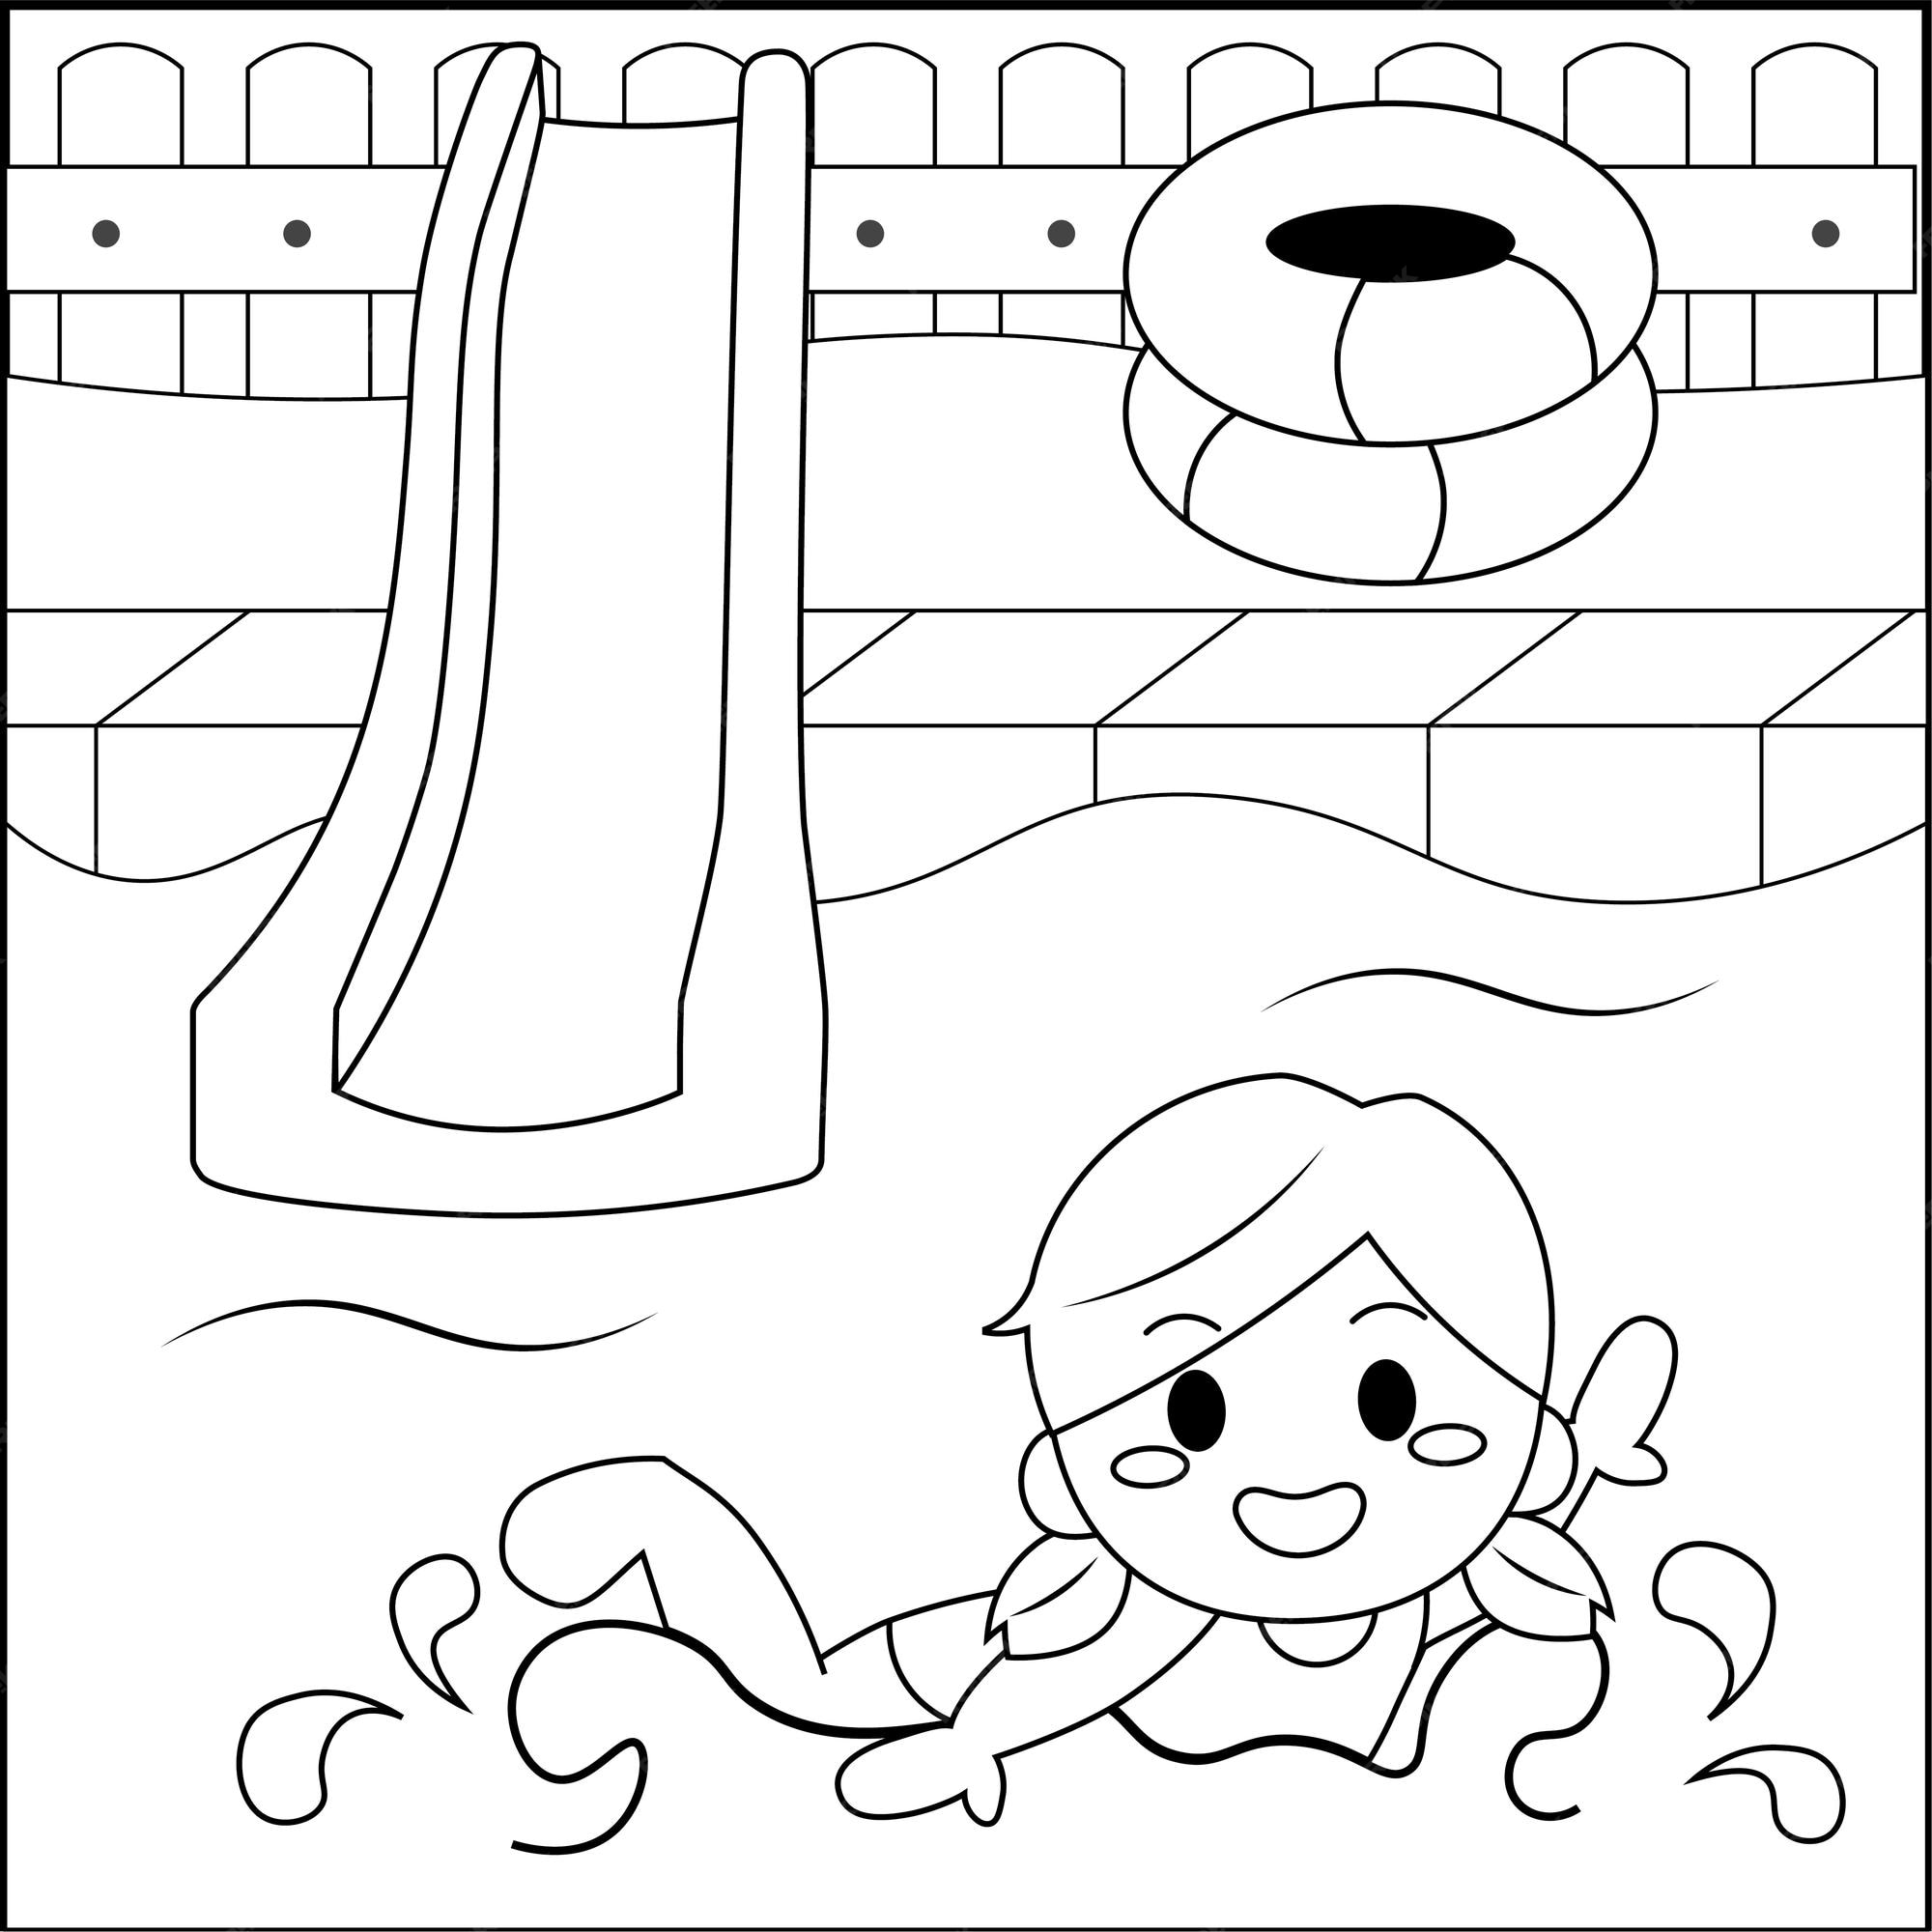 Premium vector hand drawn swimming pool outline doodle coloring page